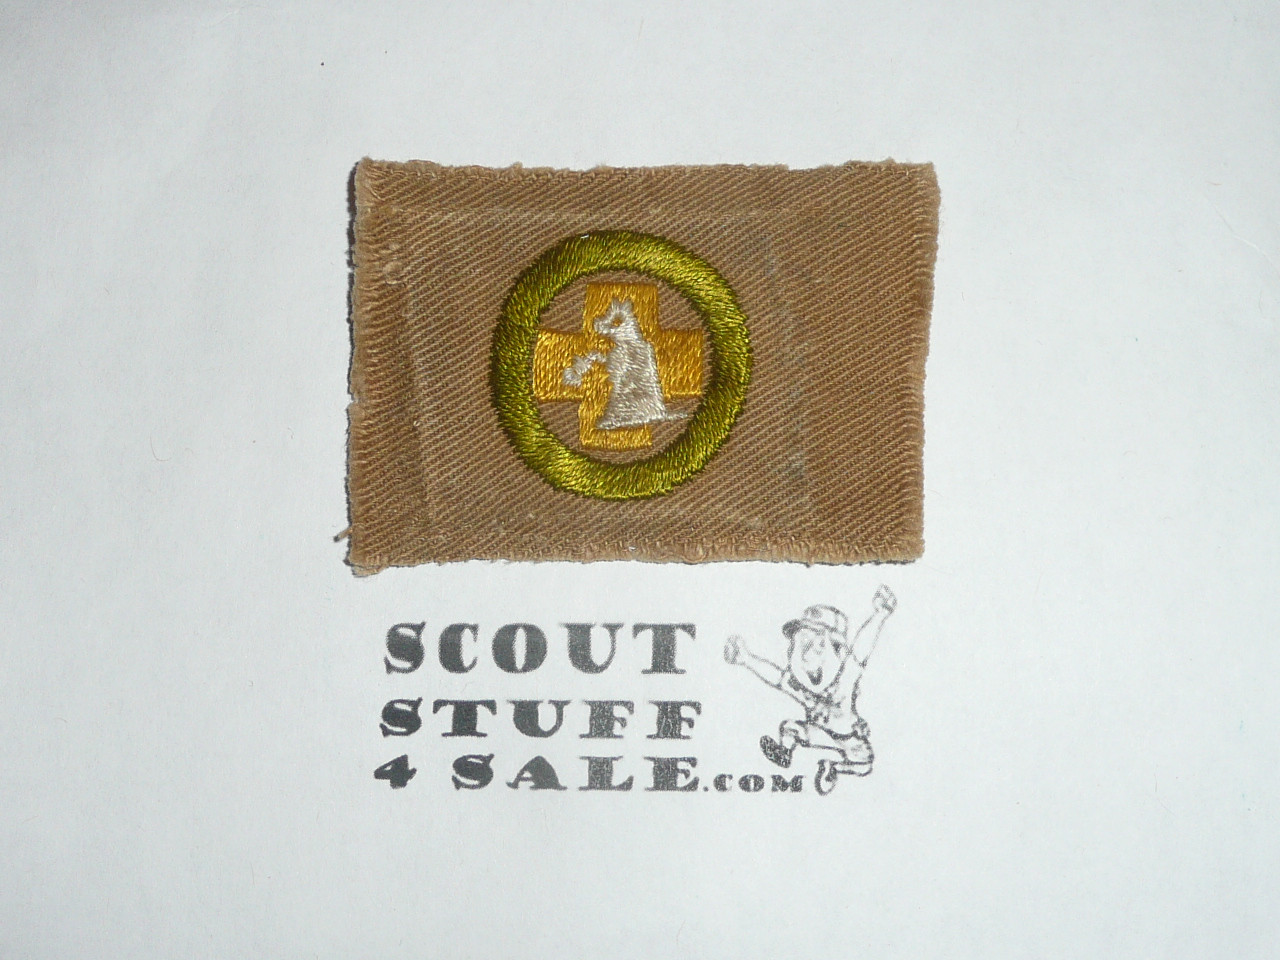 First Aid to Animals - Type A - Square Tan Merit Badge (1911-1933), used